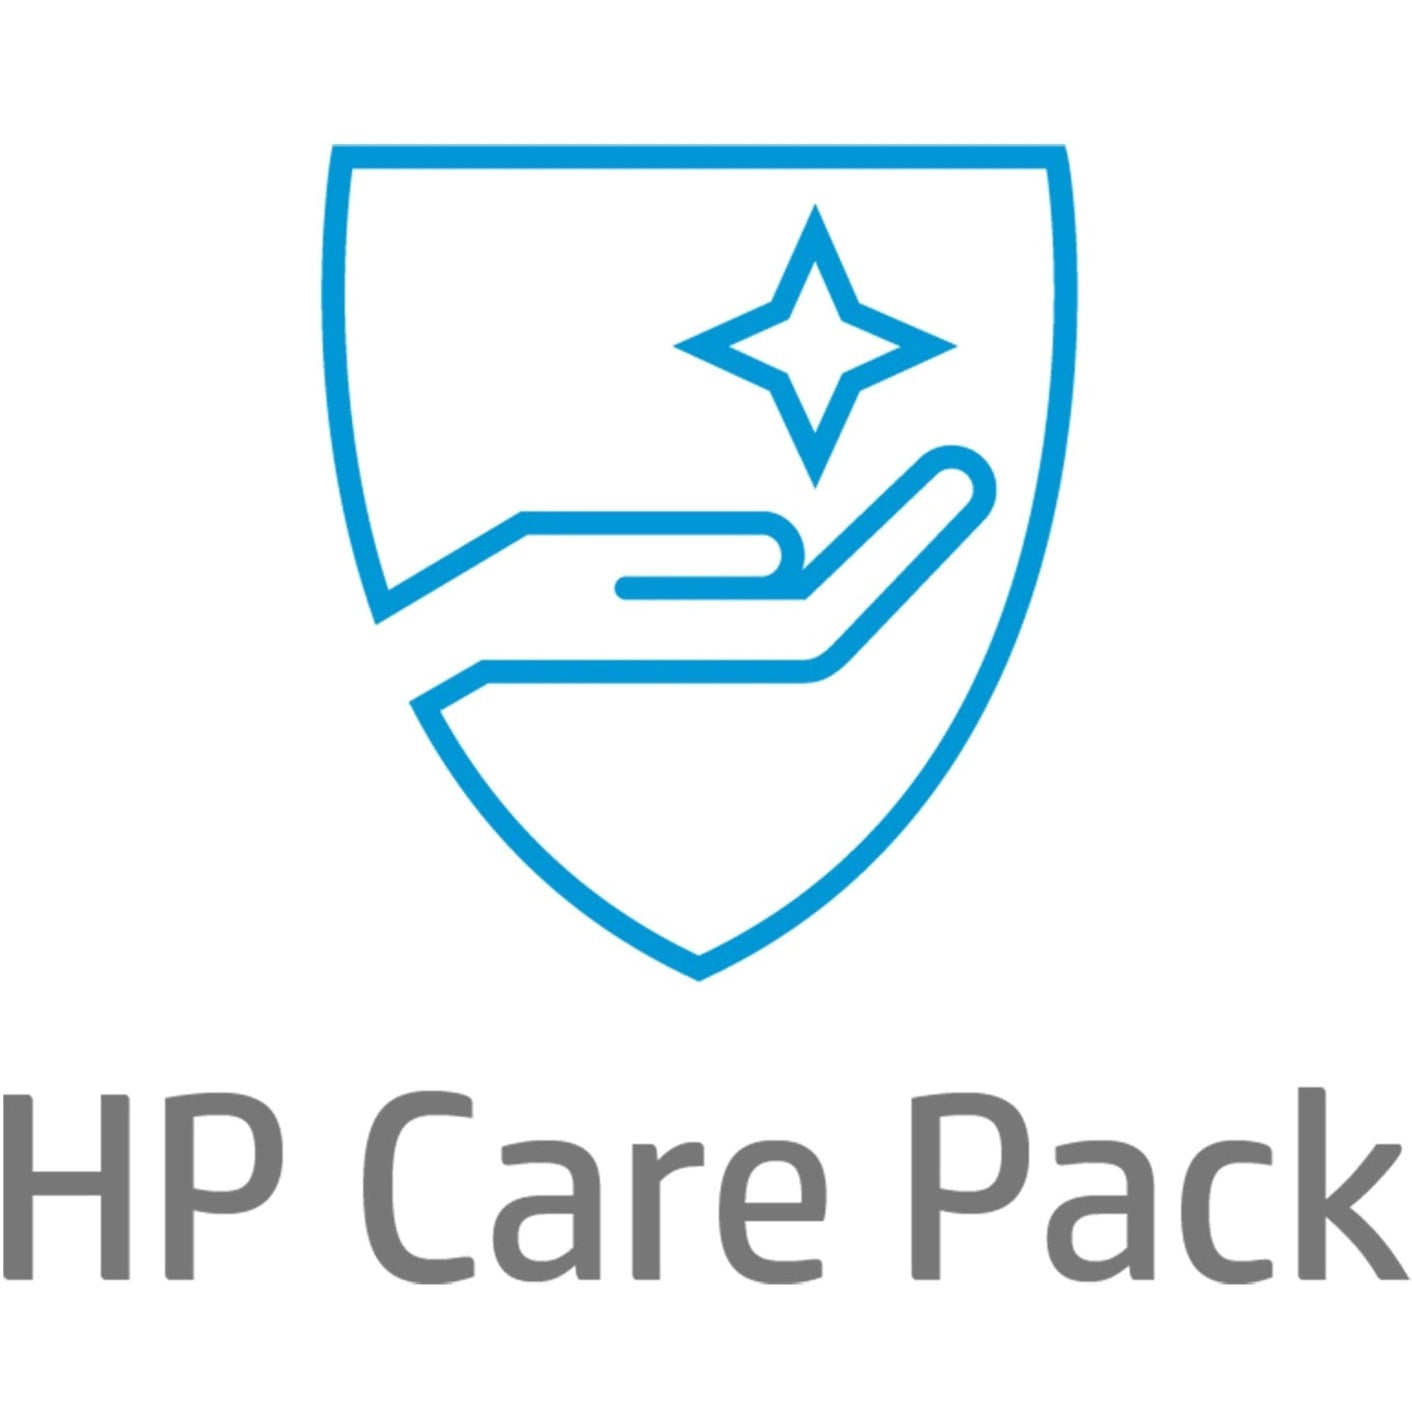 HP Care Pack Hardware Support for Travelers with Defective Media Retention - Extended Warranty - 1 Year - Warranty (UB0L1PE)